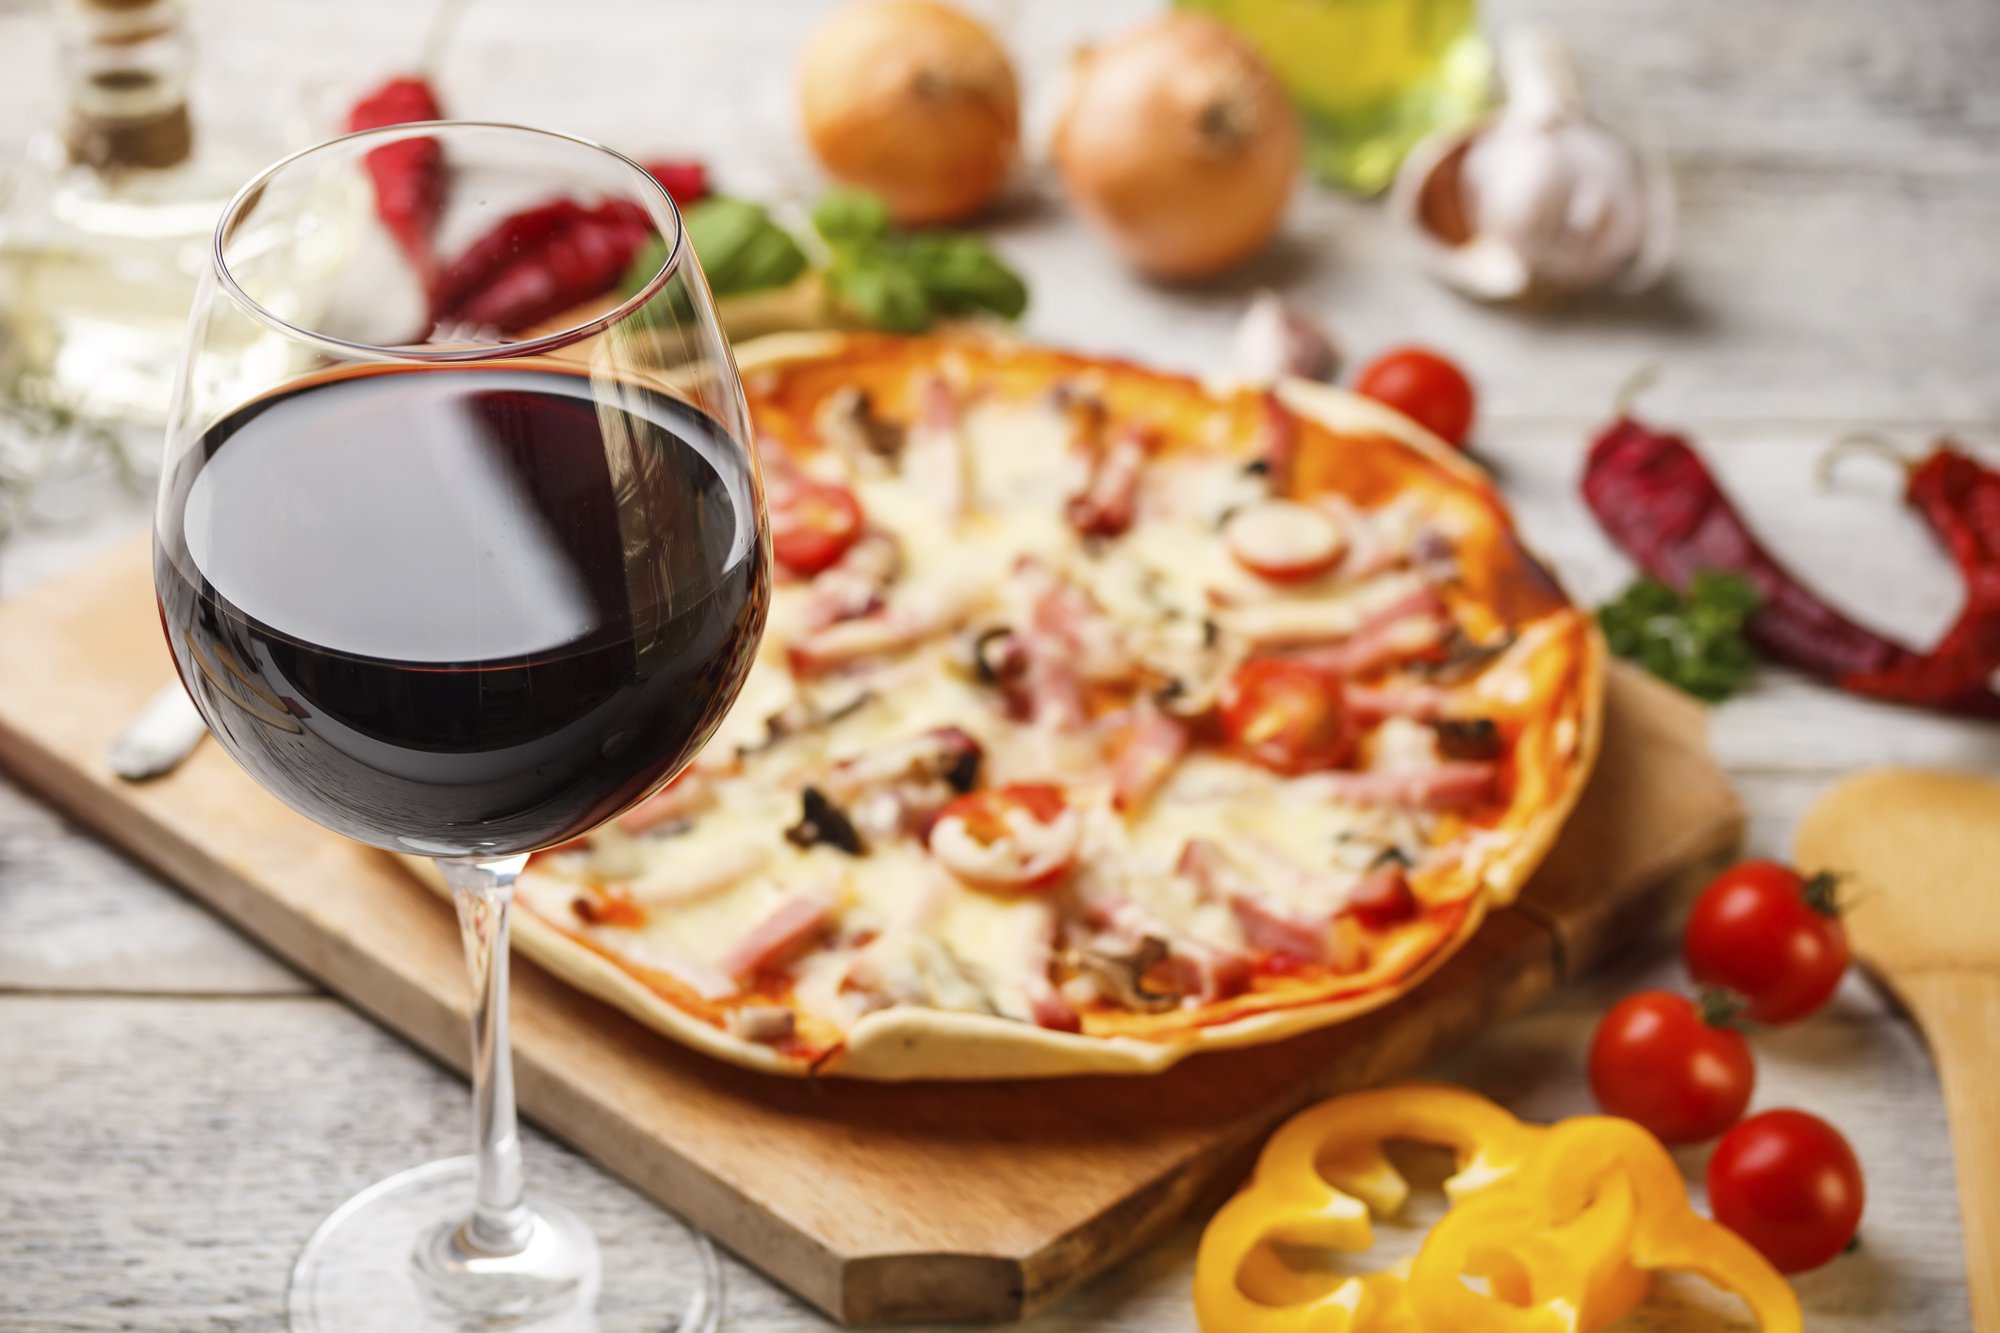 Glass of red wine with homemade pizza in the background